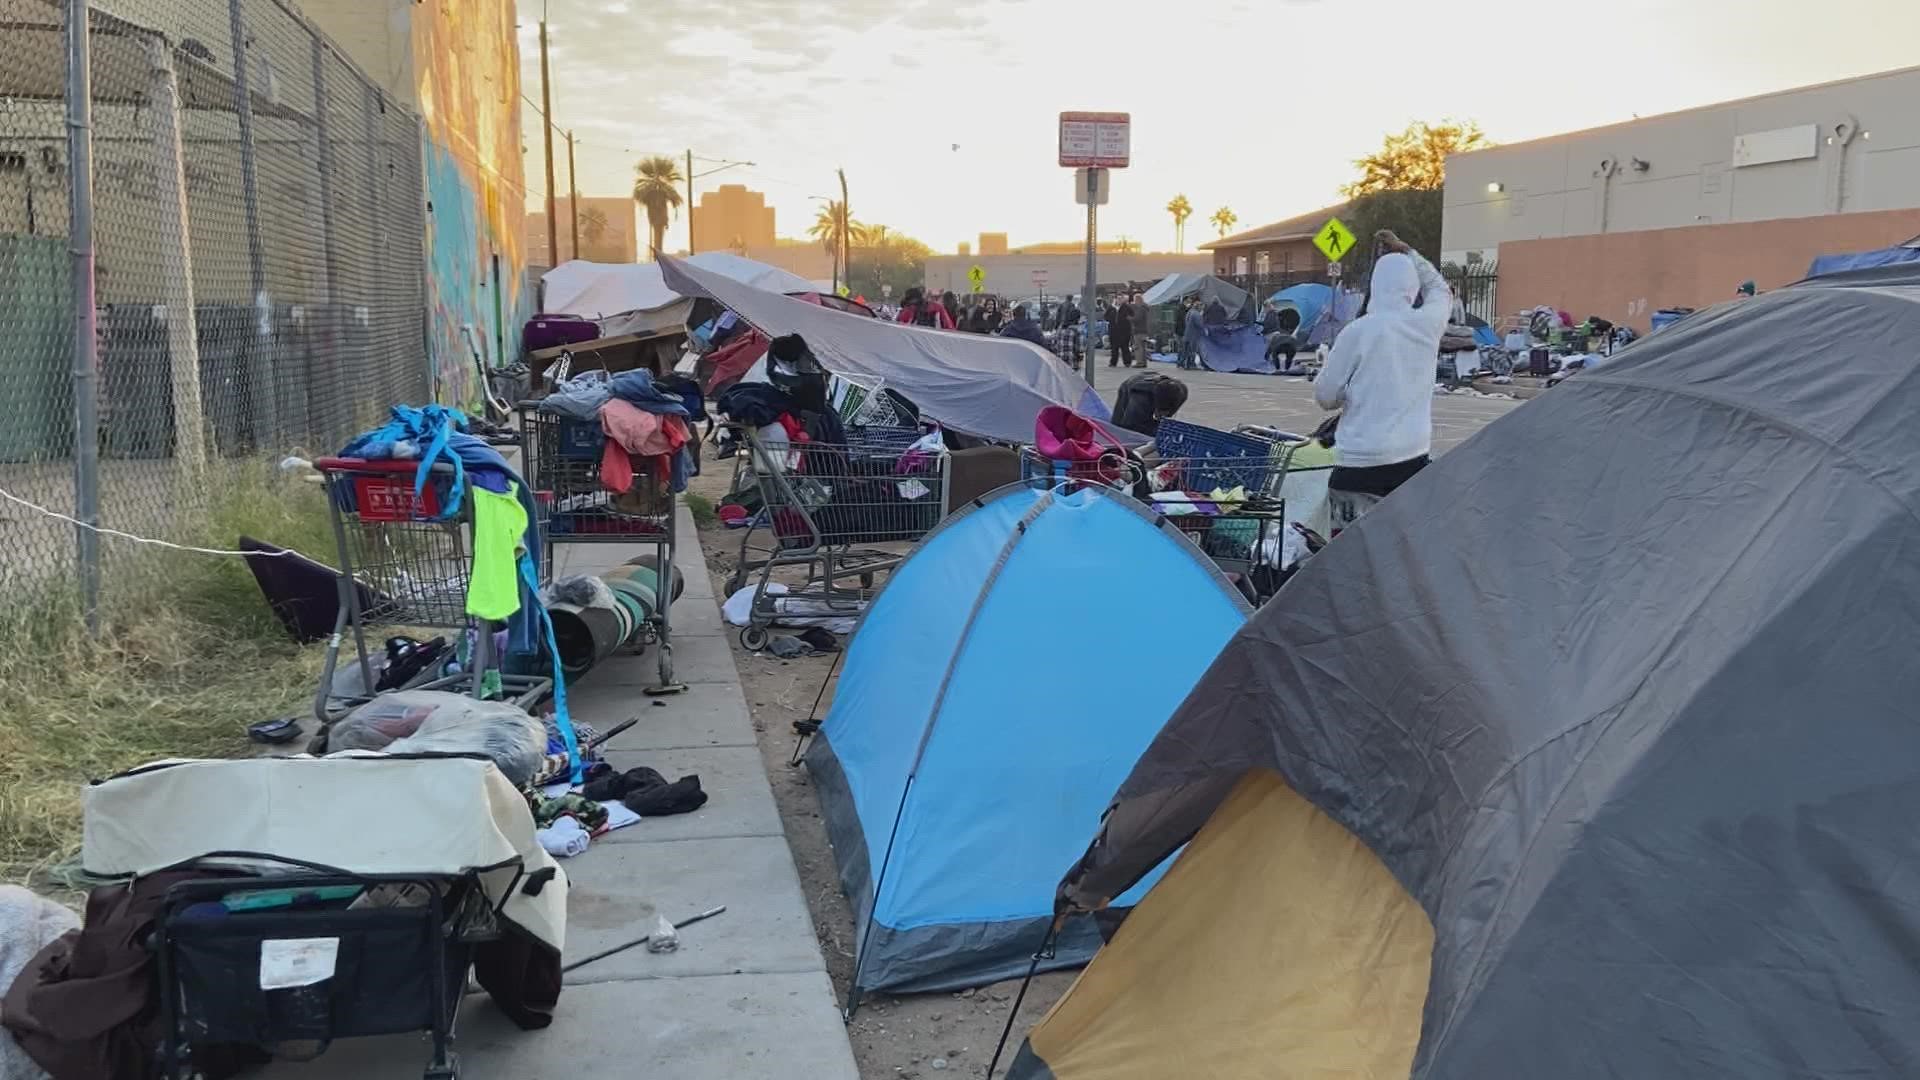 People camping on the block were able to move their belongings to a staging area during the cleaning. Anything they chose to leave behind was thrown away.